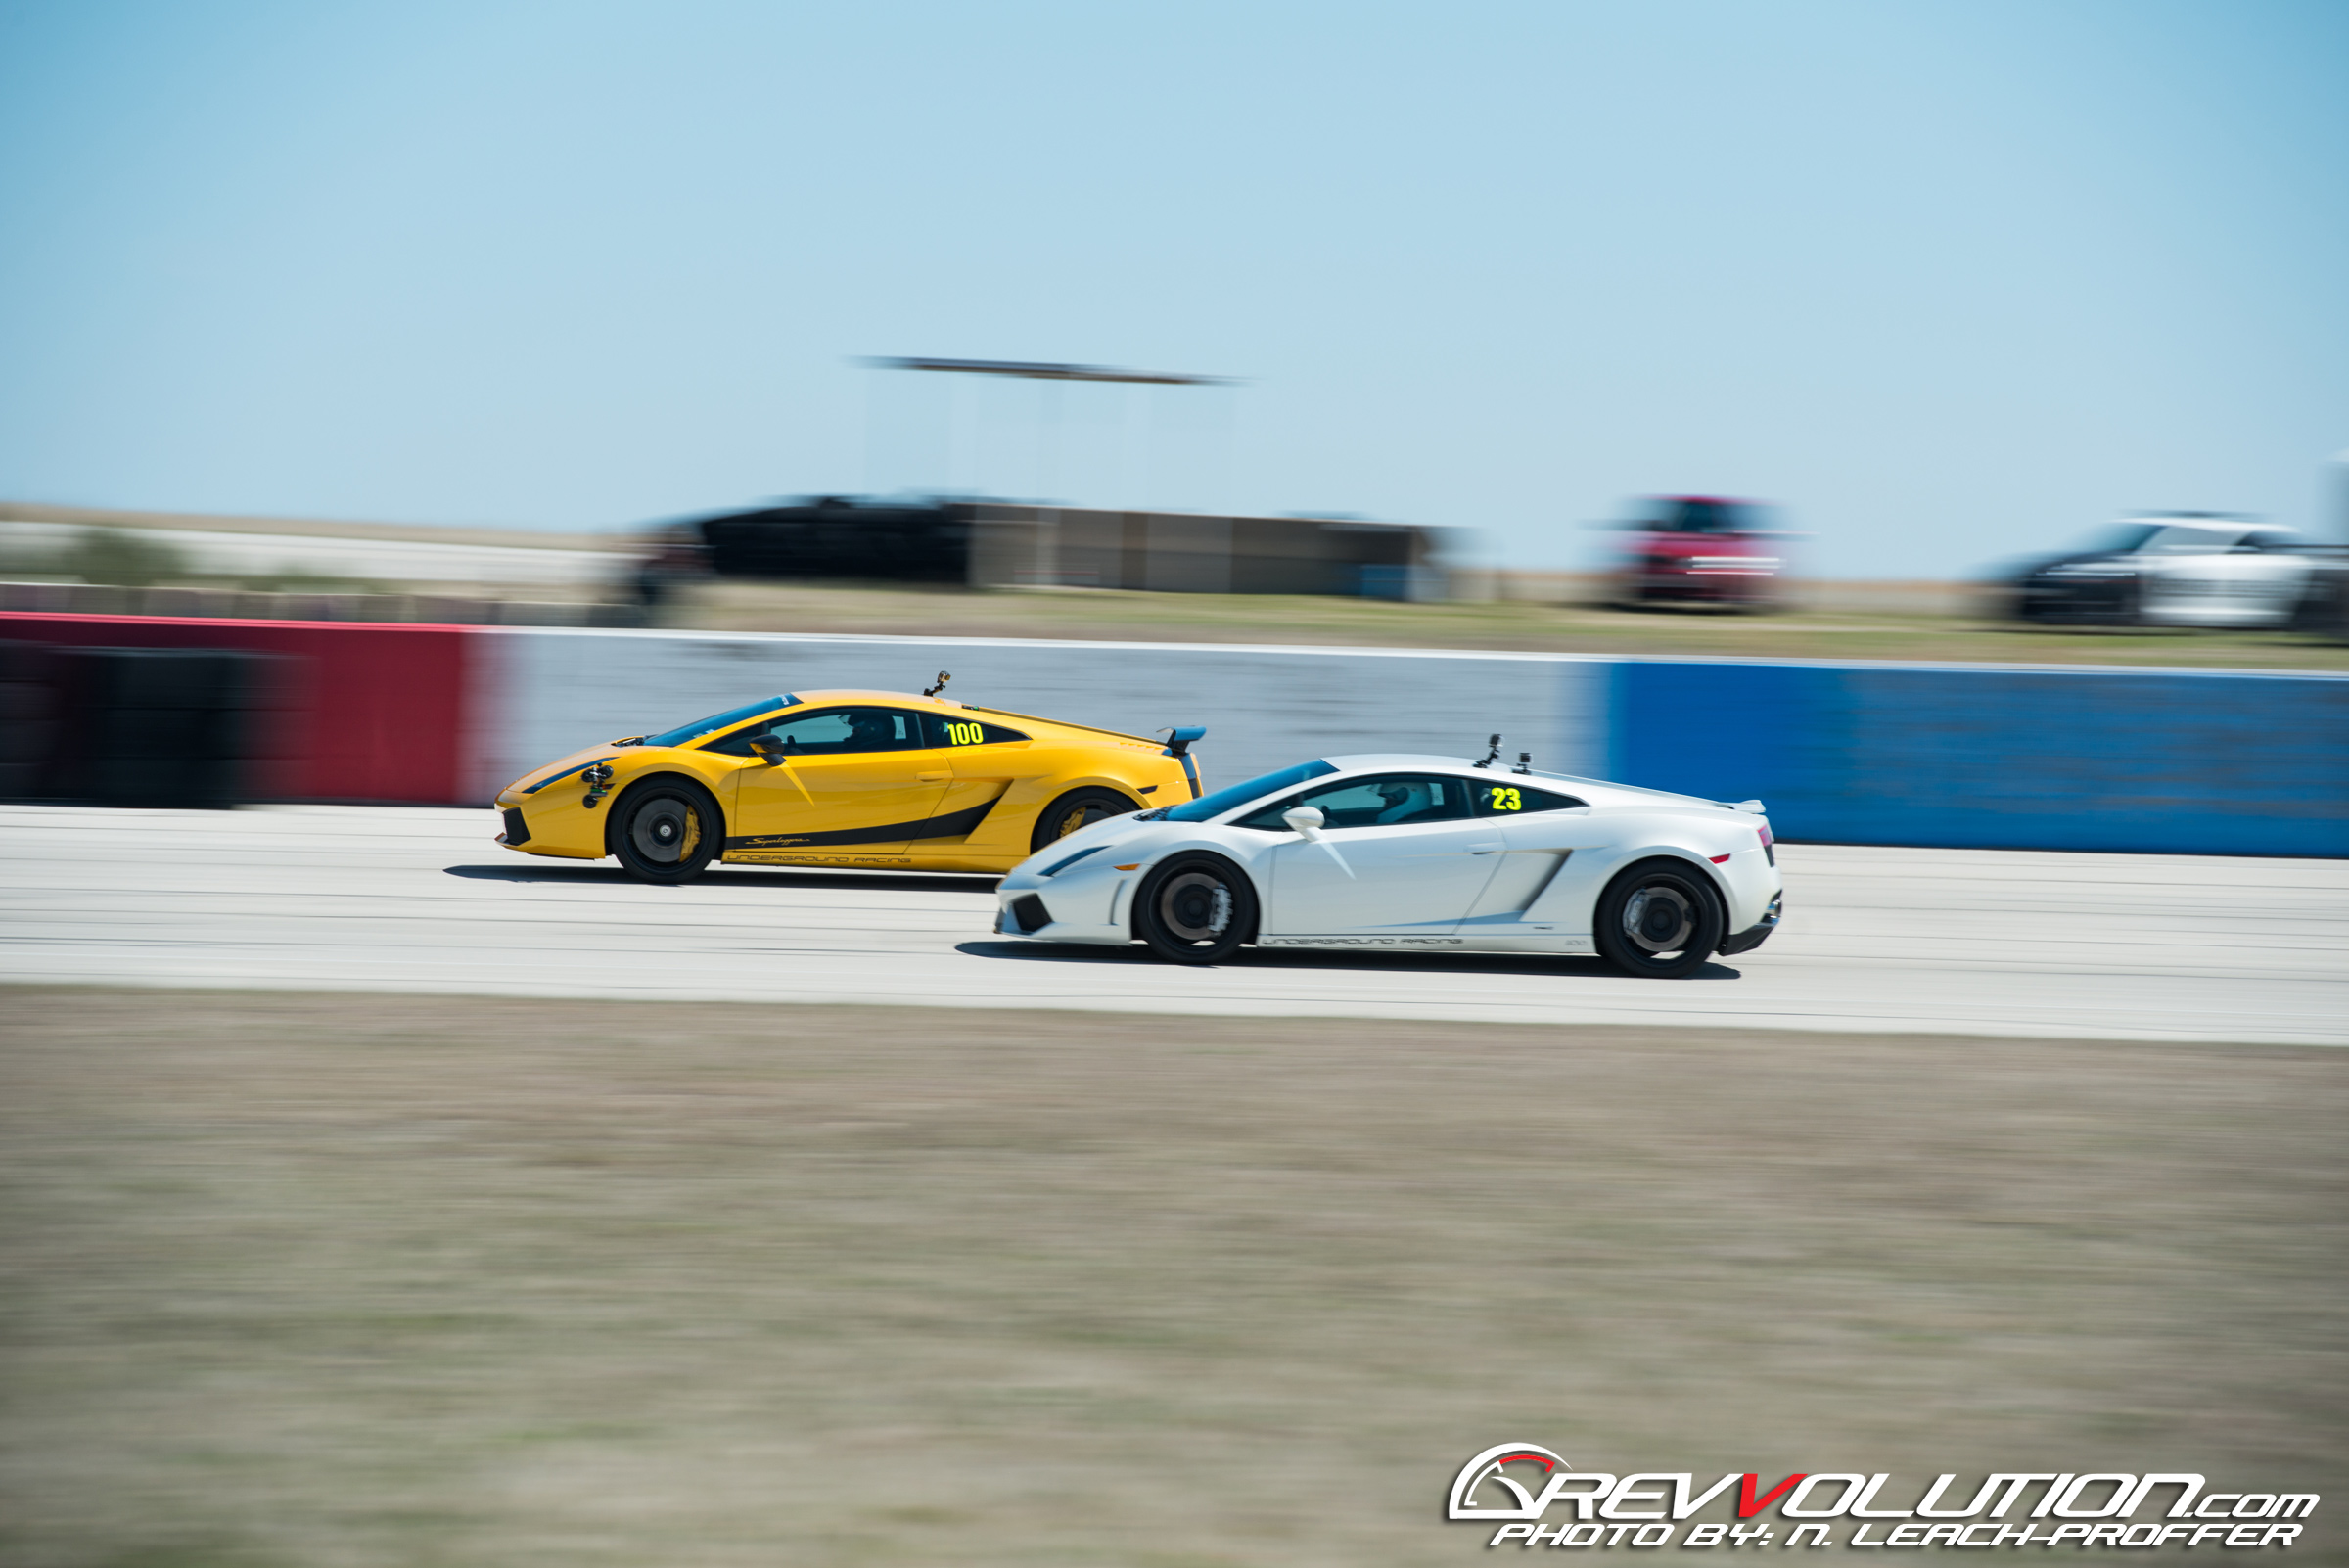 Bulls on Parade: Day Two of TX2K14 Roll Race Nationals